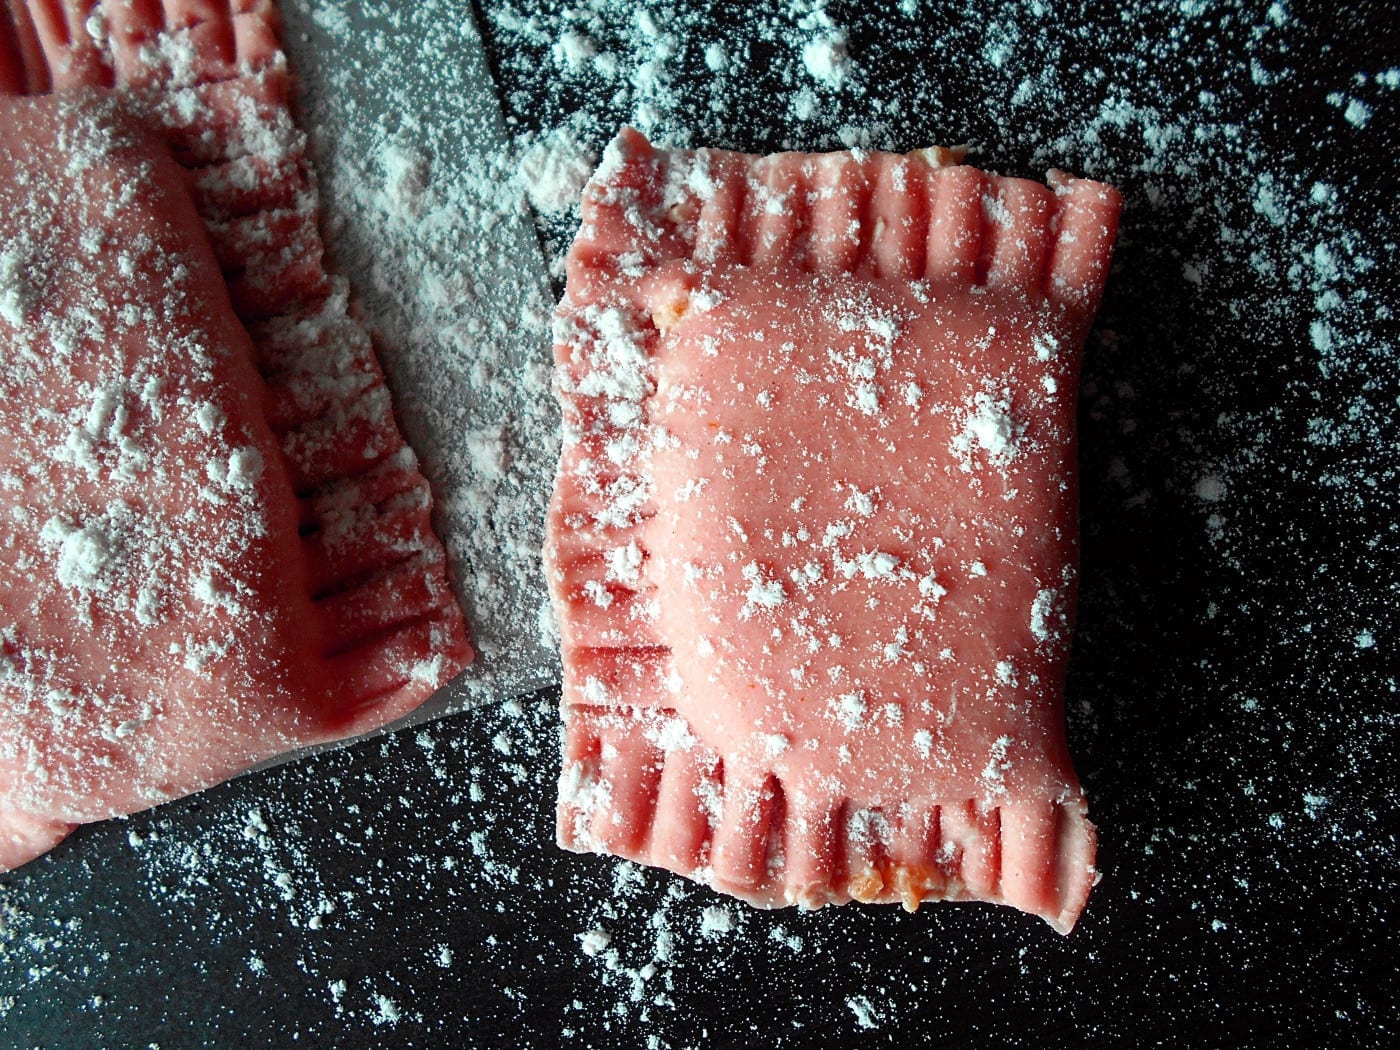 Overhead view of a single tomato ravioli lightly floured. On the side, part of another ravioli is visible